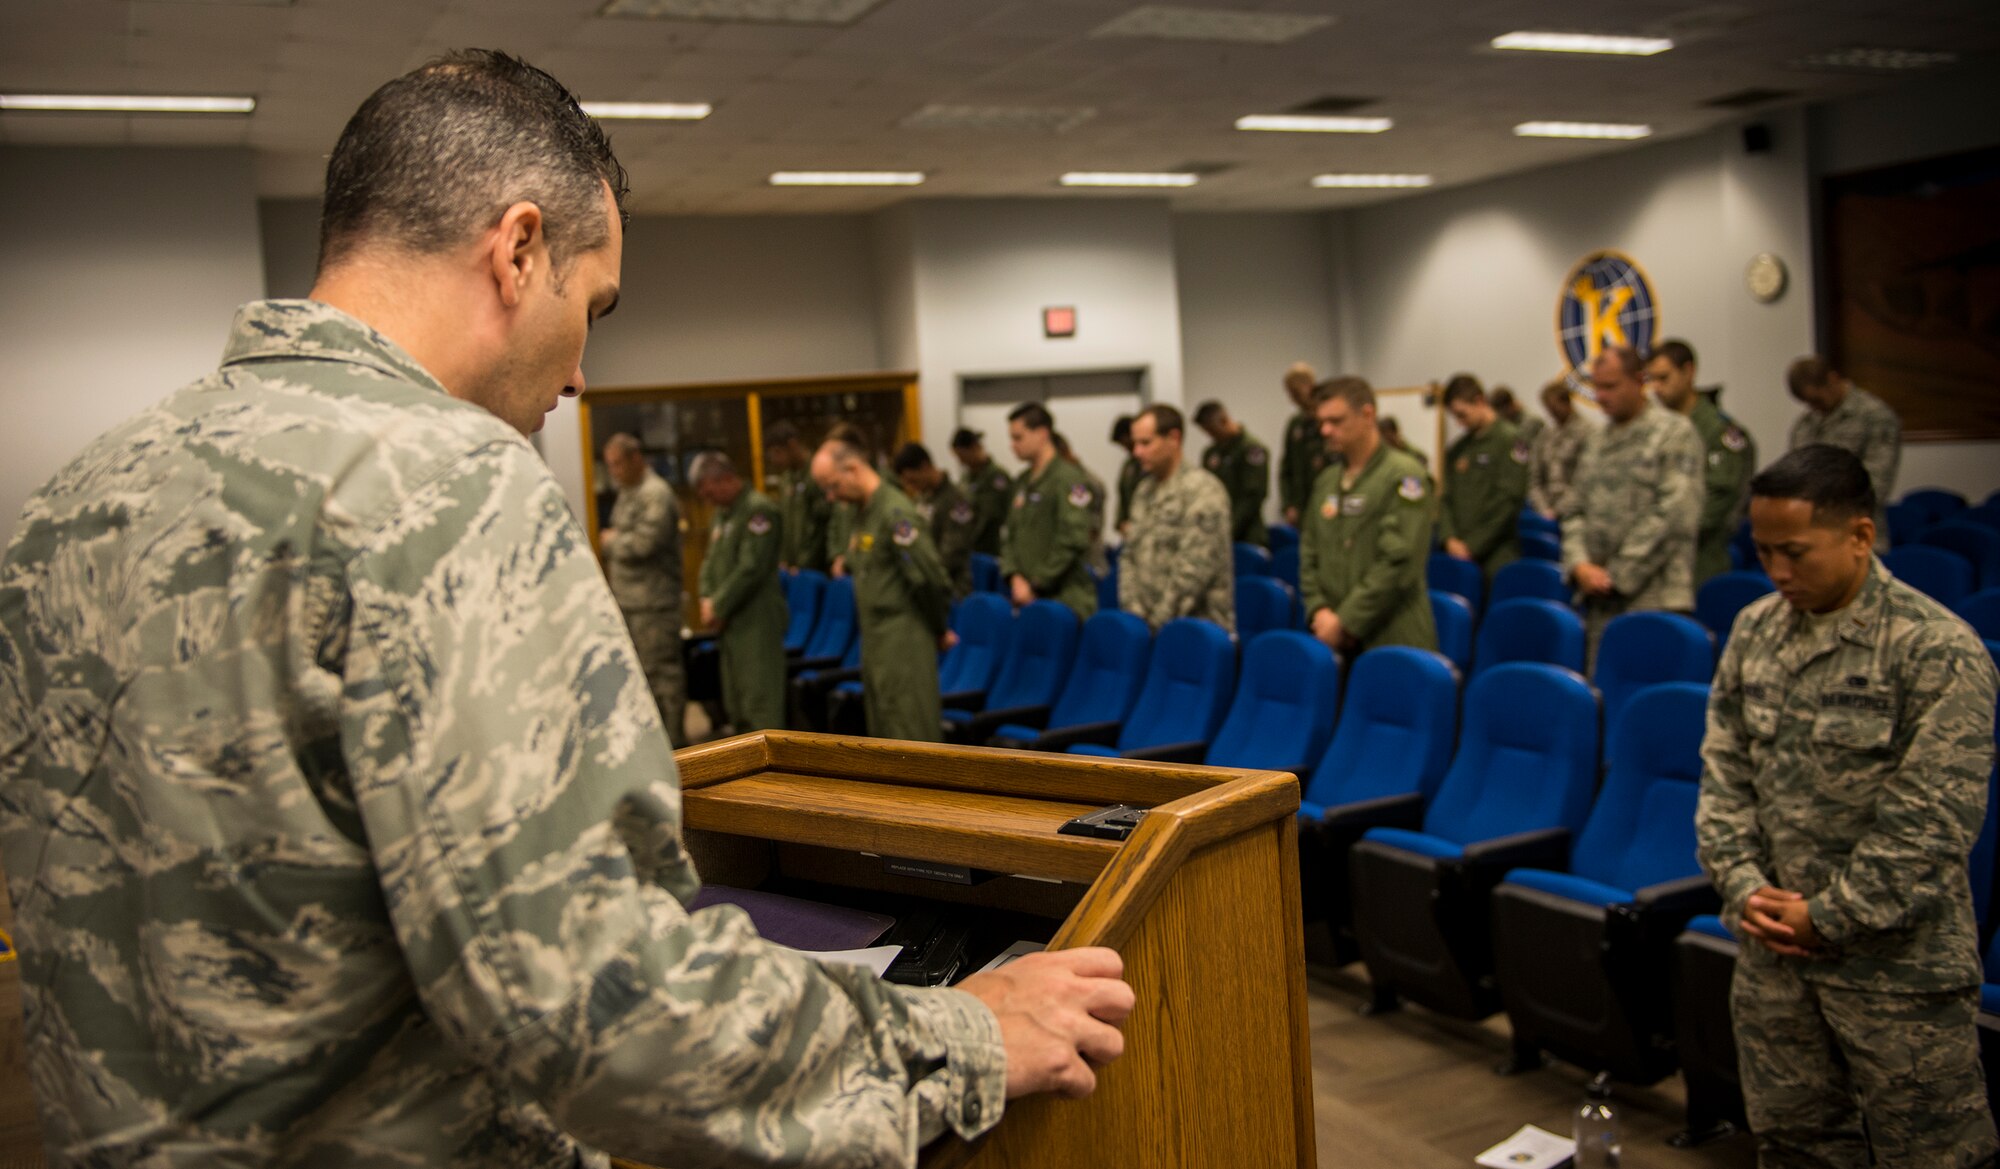 U.S. Air Force Capt. Jeremiah Blackburn, a chaplain for the 23d Wing Chapel, says a prayer during a Khobar Towers Remembrance ceremony at Moody Air Force Base, Ga., June 25, 2014. The ceremony honored the 19 U.S. service members and one Saudi who died along with 350 others who were wounded. (U.S. Air Force photo by Senior Airman Douglas Ellis/Released)
